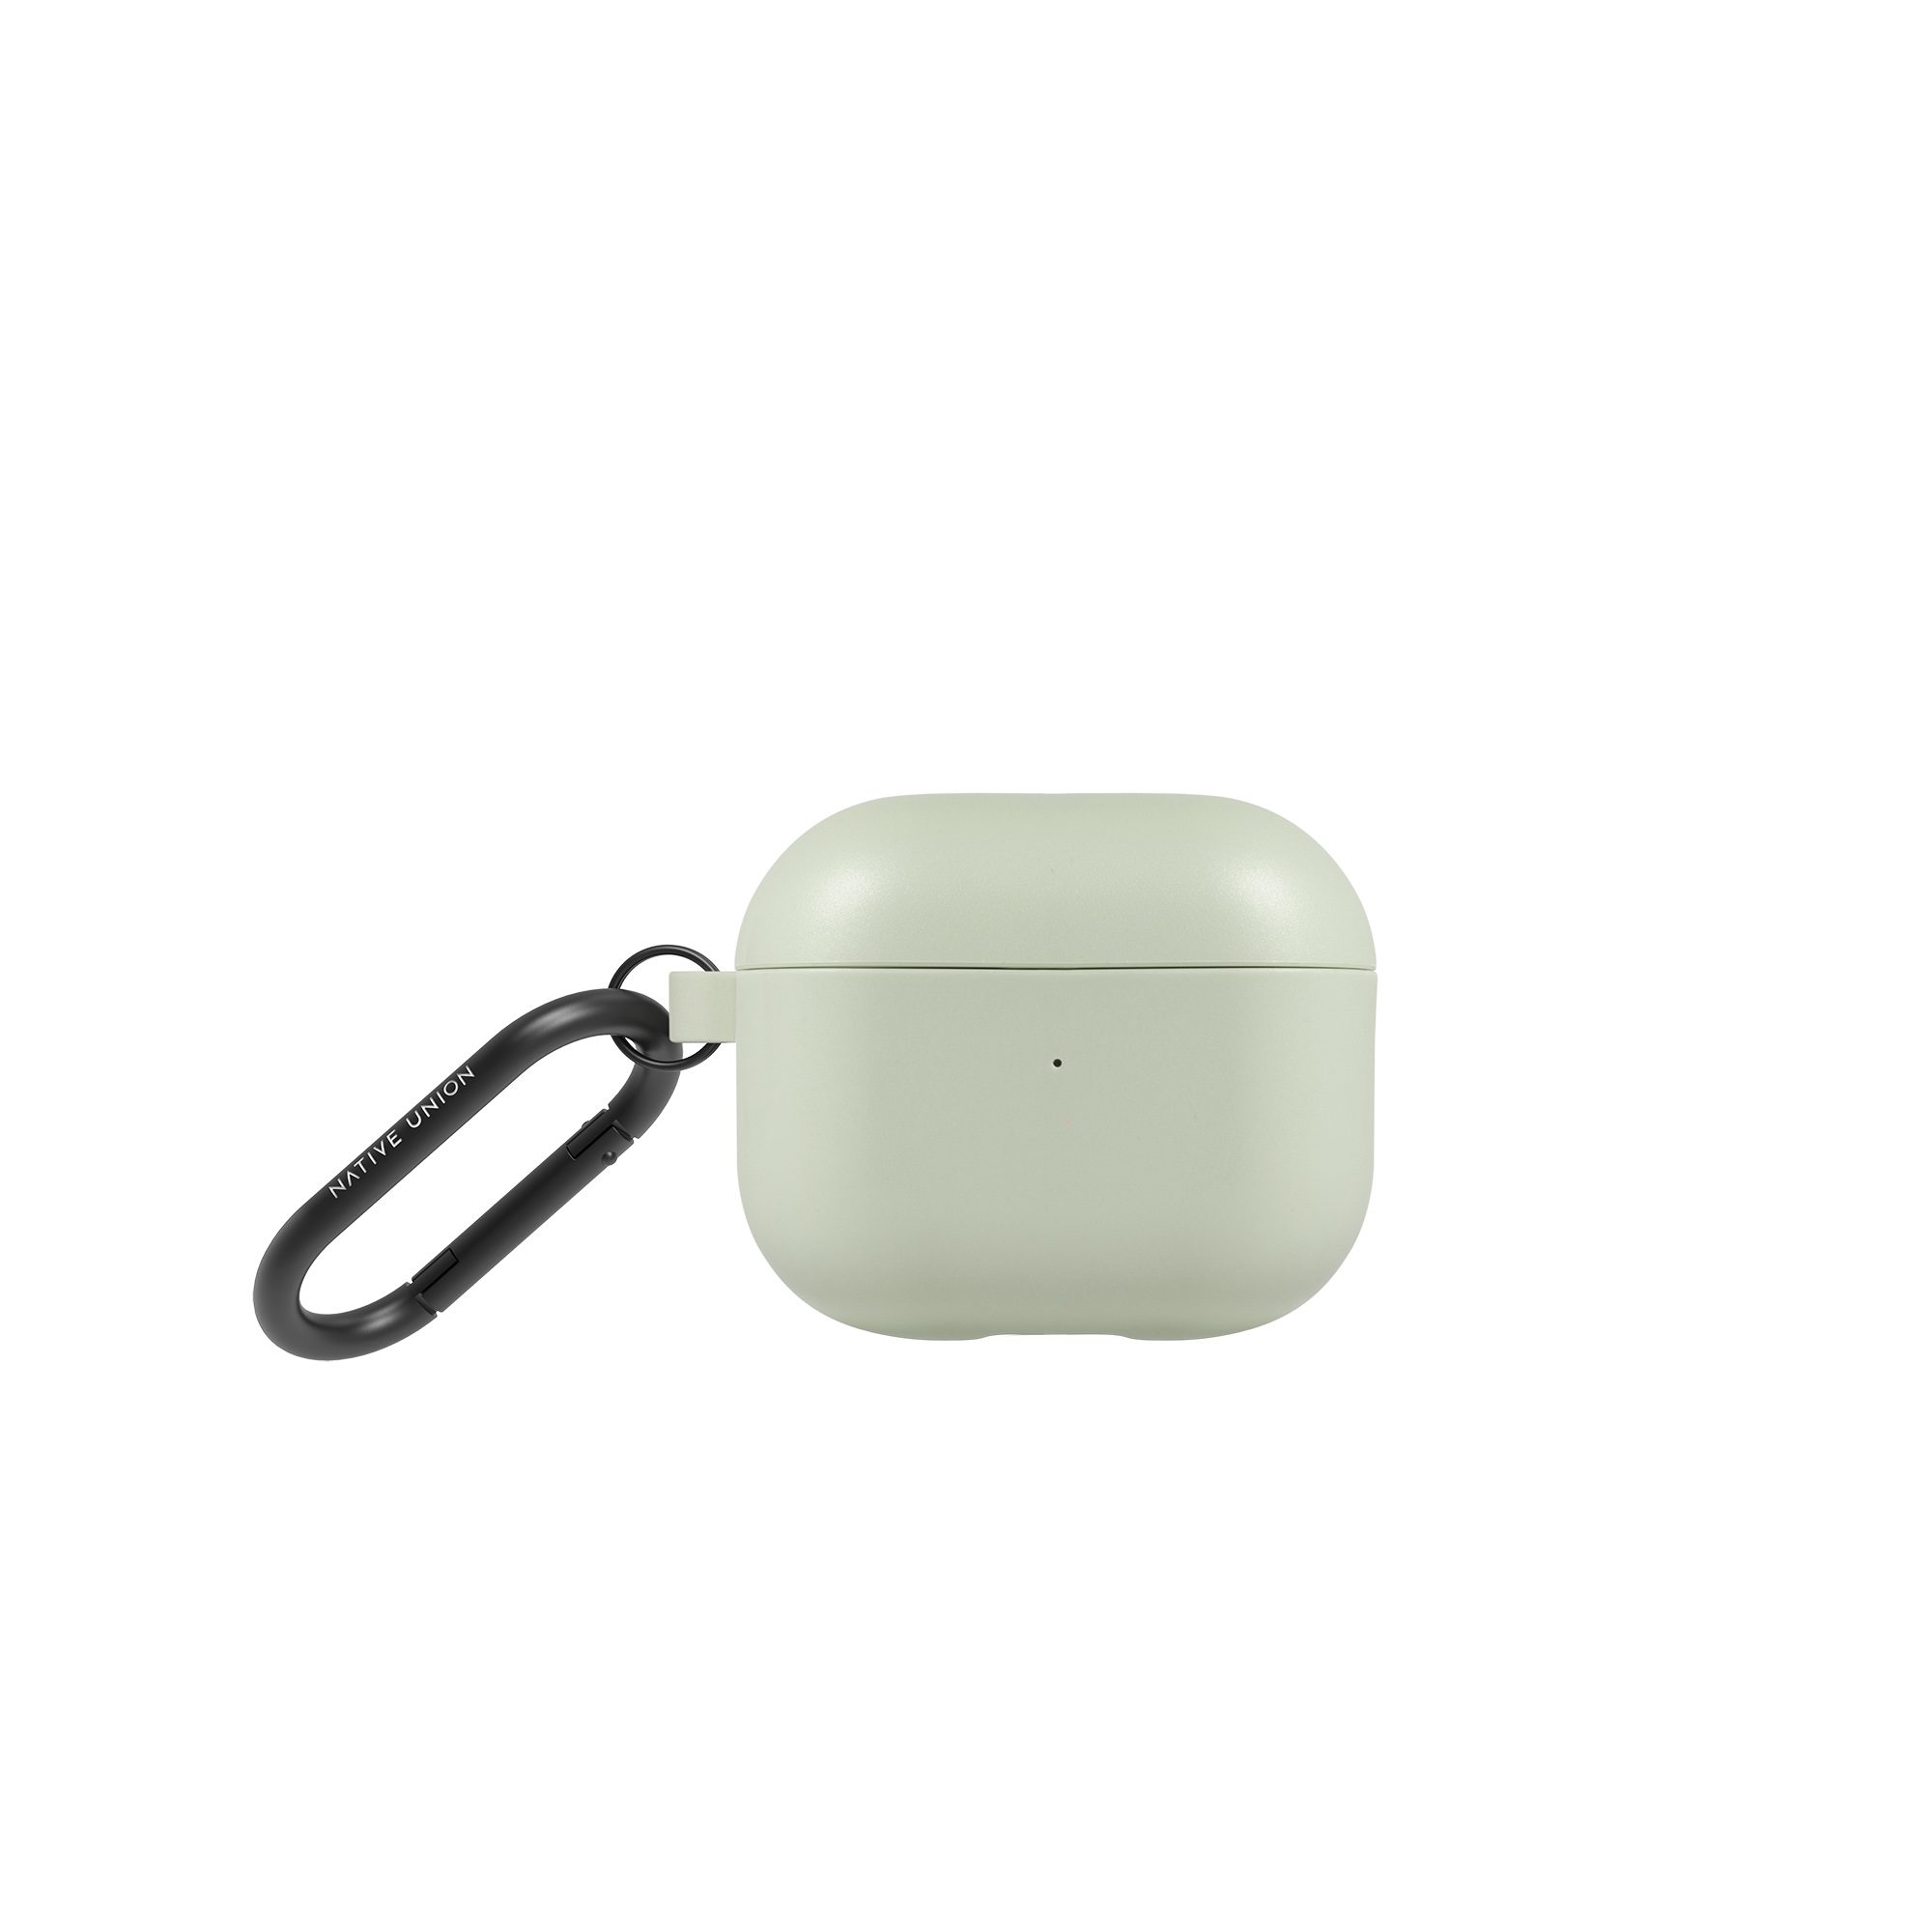 Roam Case for Airpods GEN 3,Wireless Charging Compatible